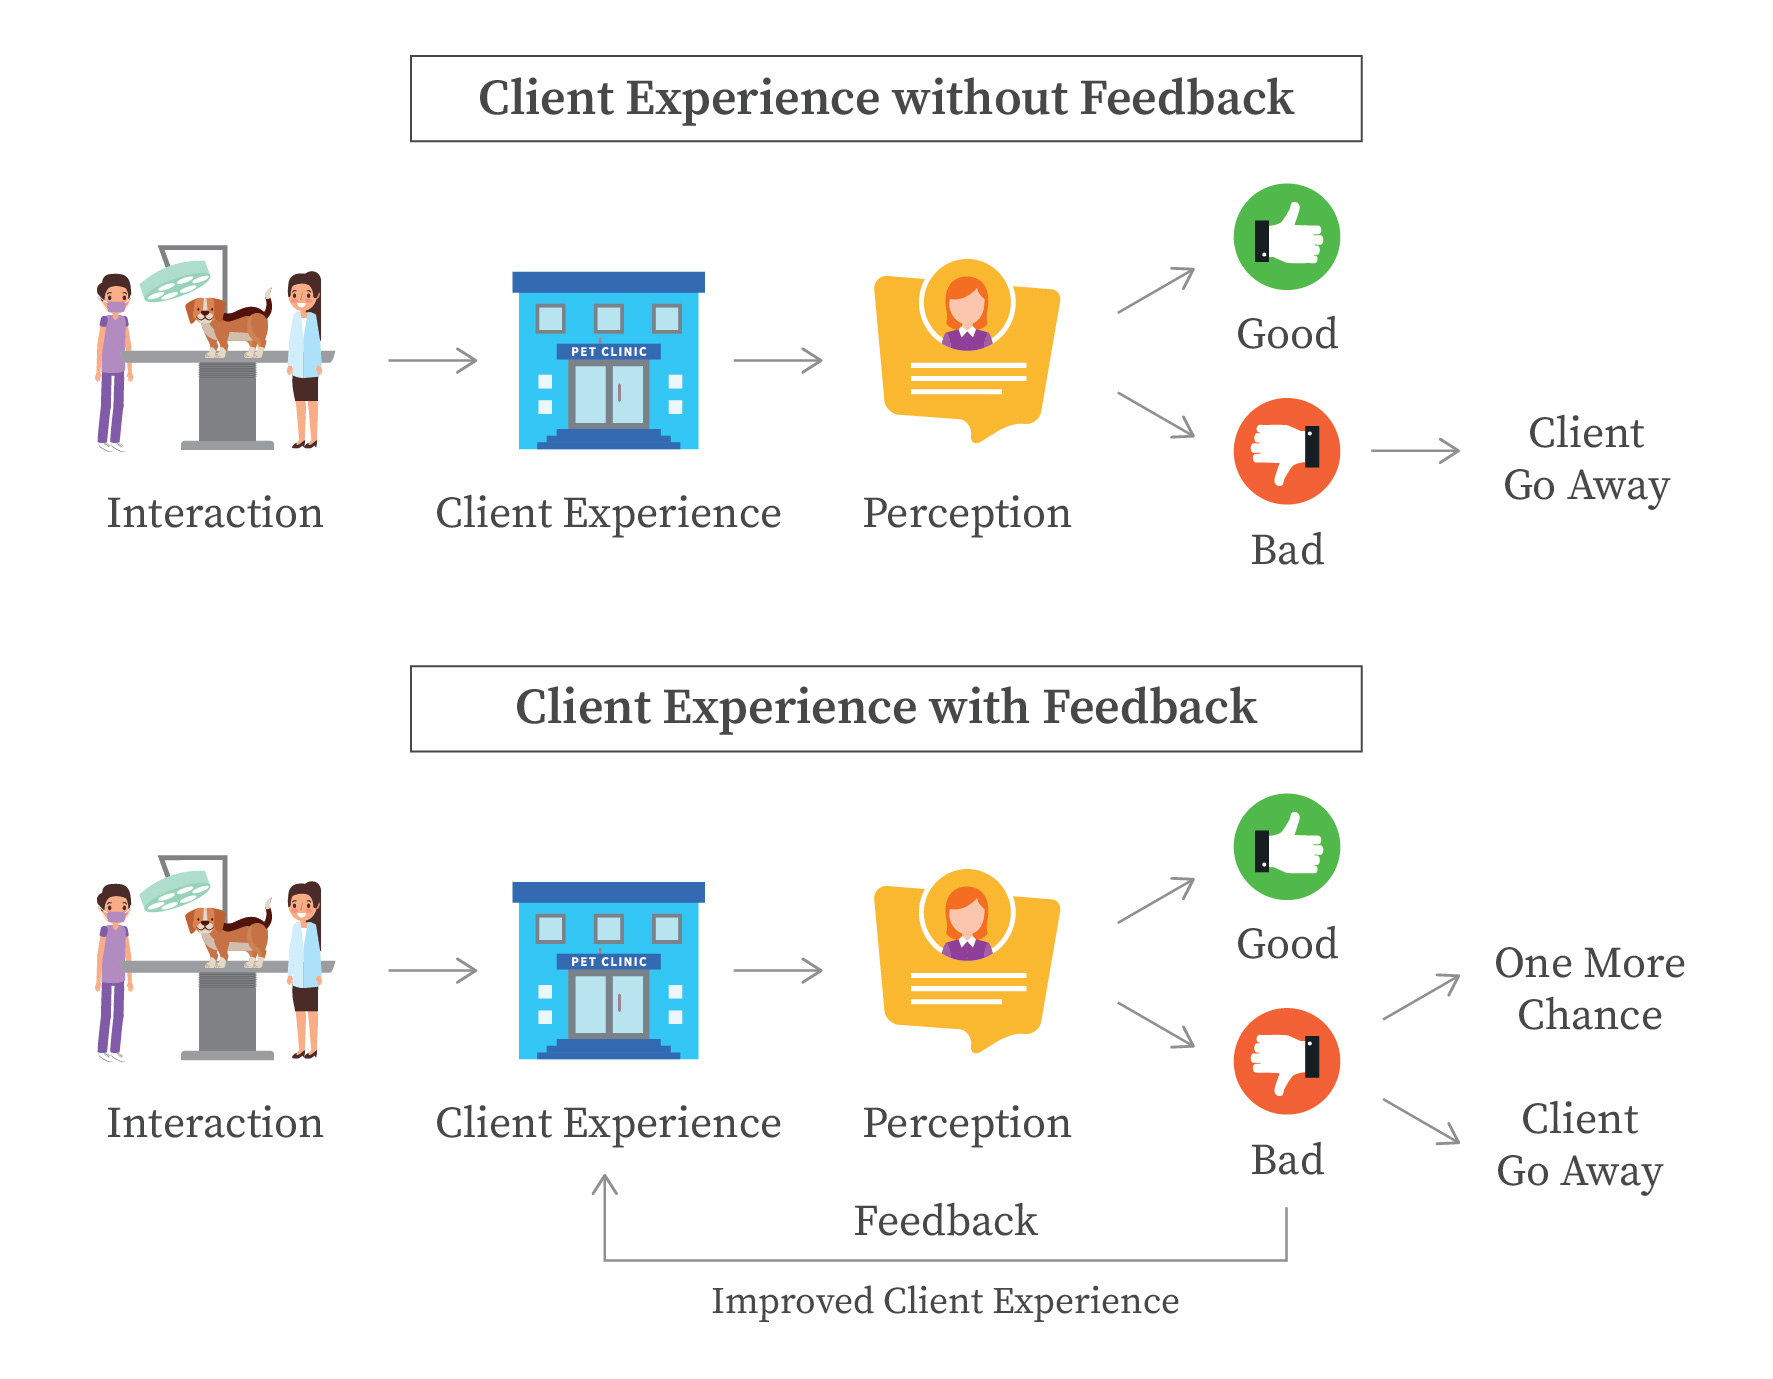 feedback improves client experience and retention and 